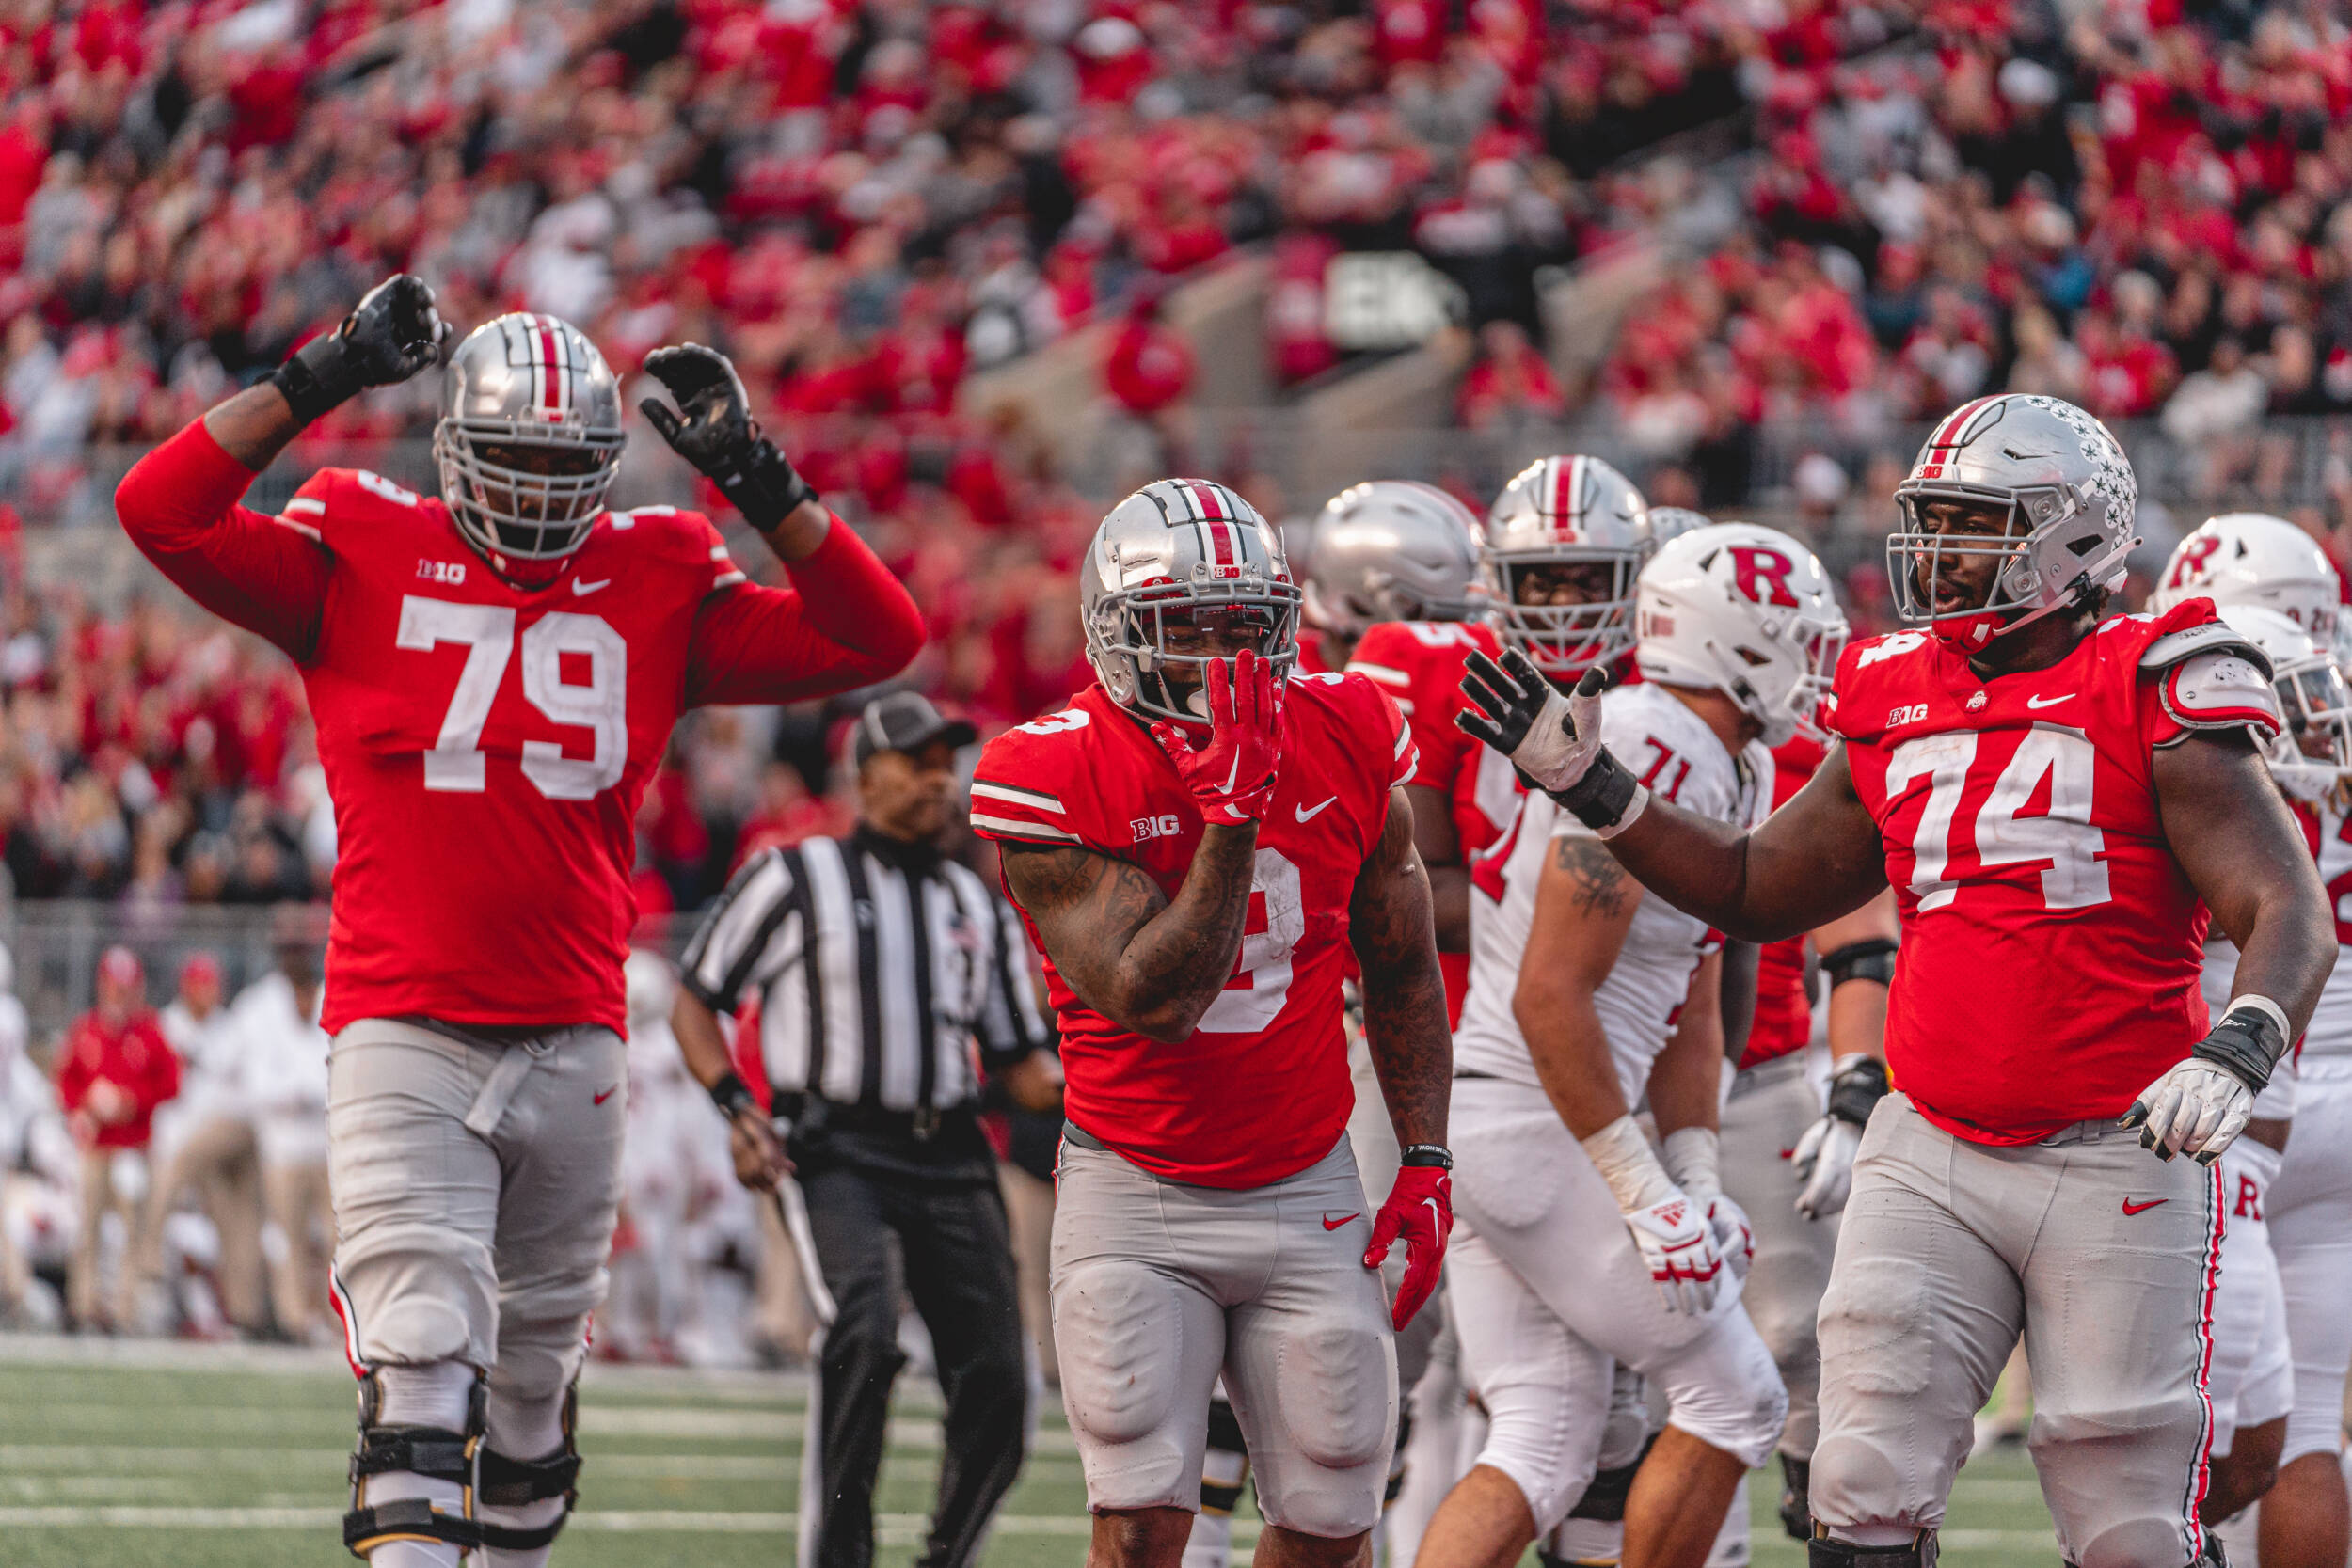 3rd Ranked Buckeyes Run Past Rutgers Behind Williams' Record-Setting Day